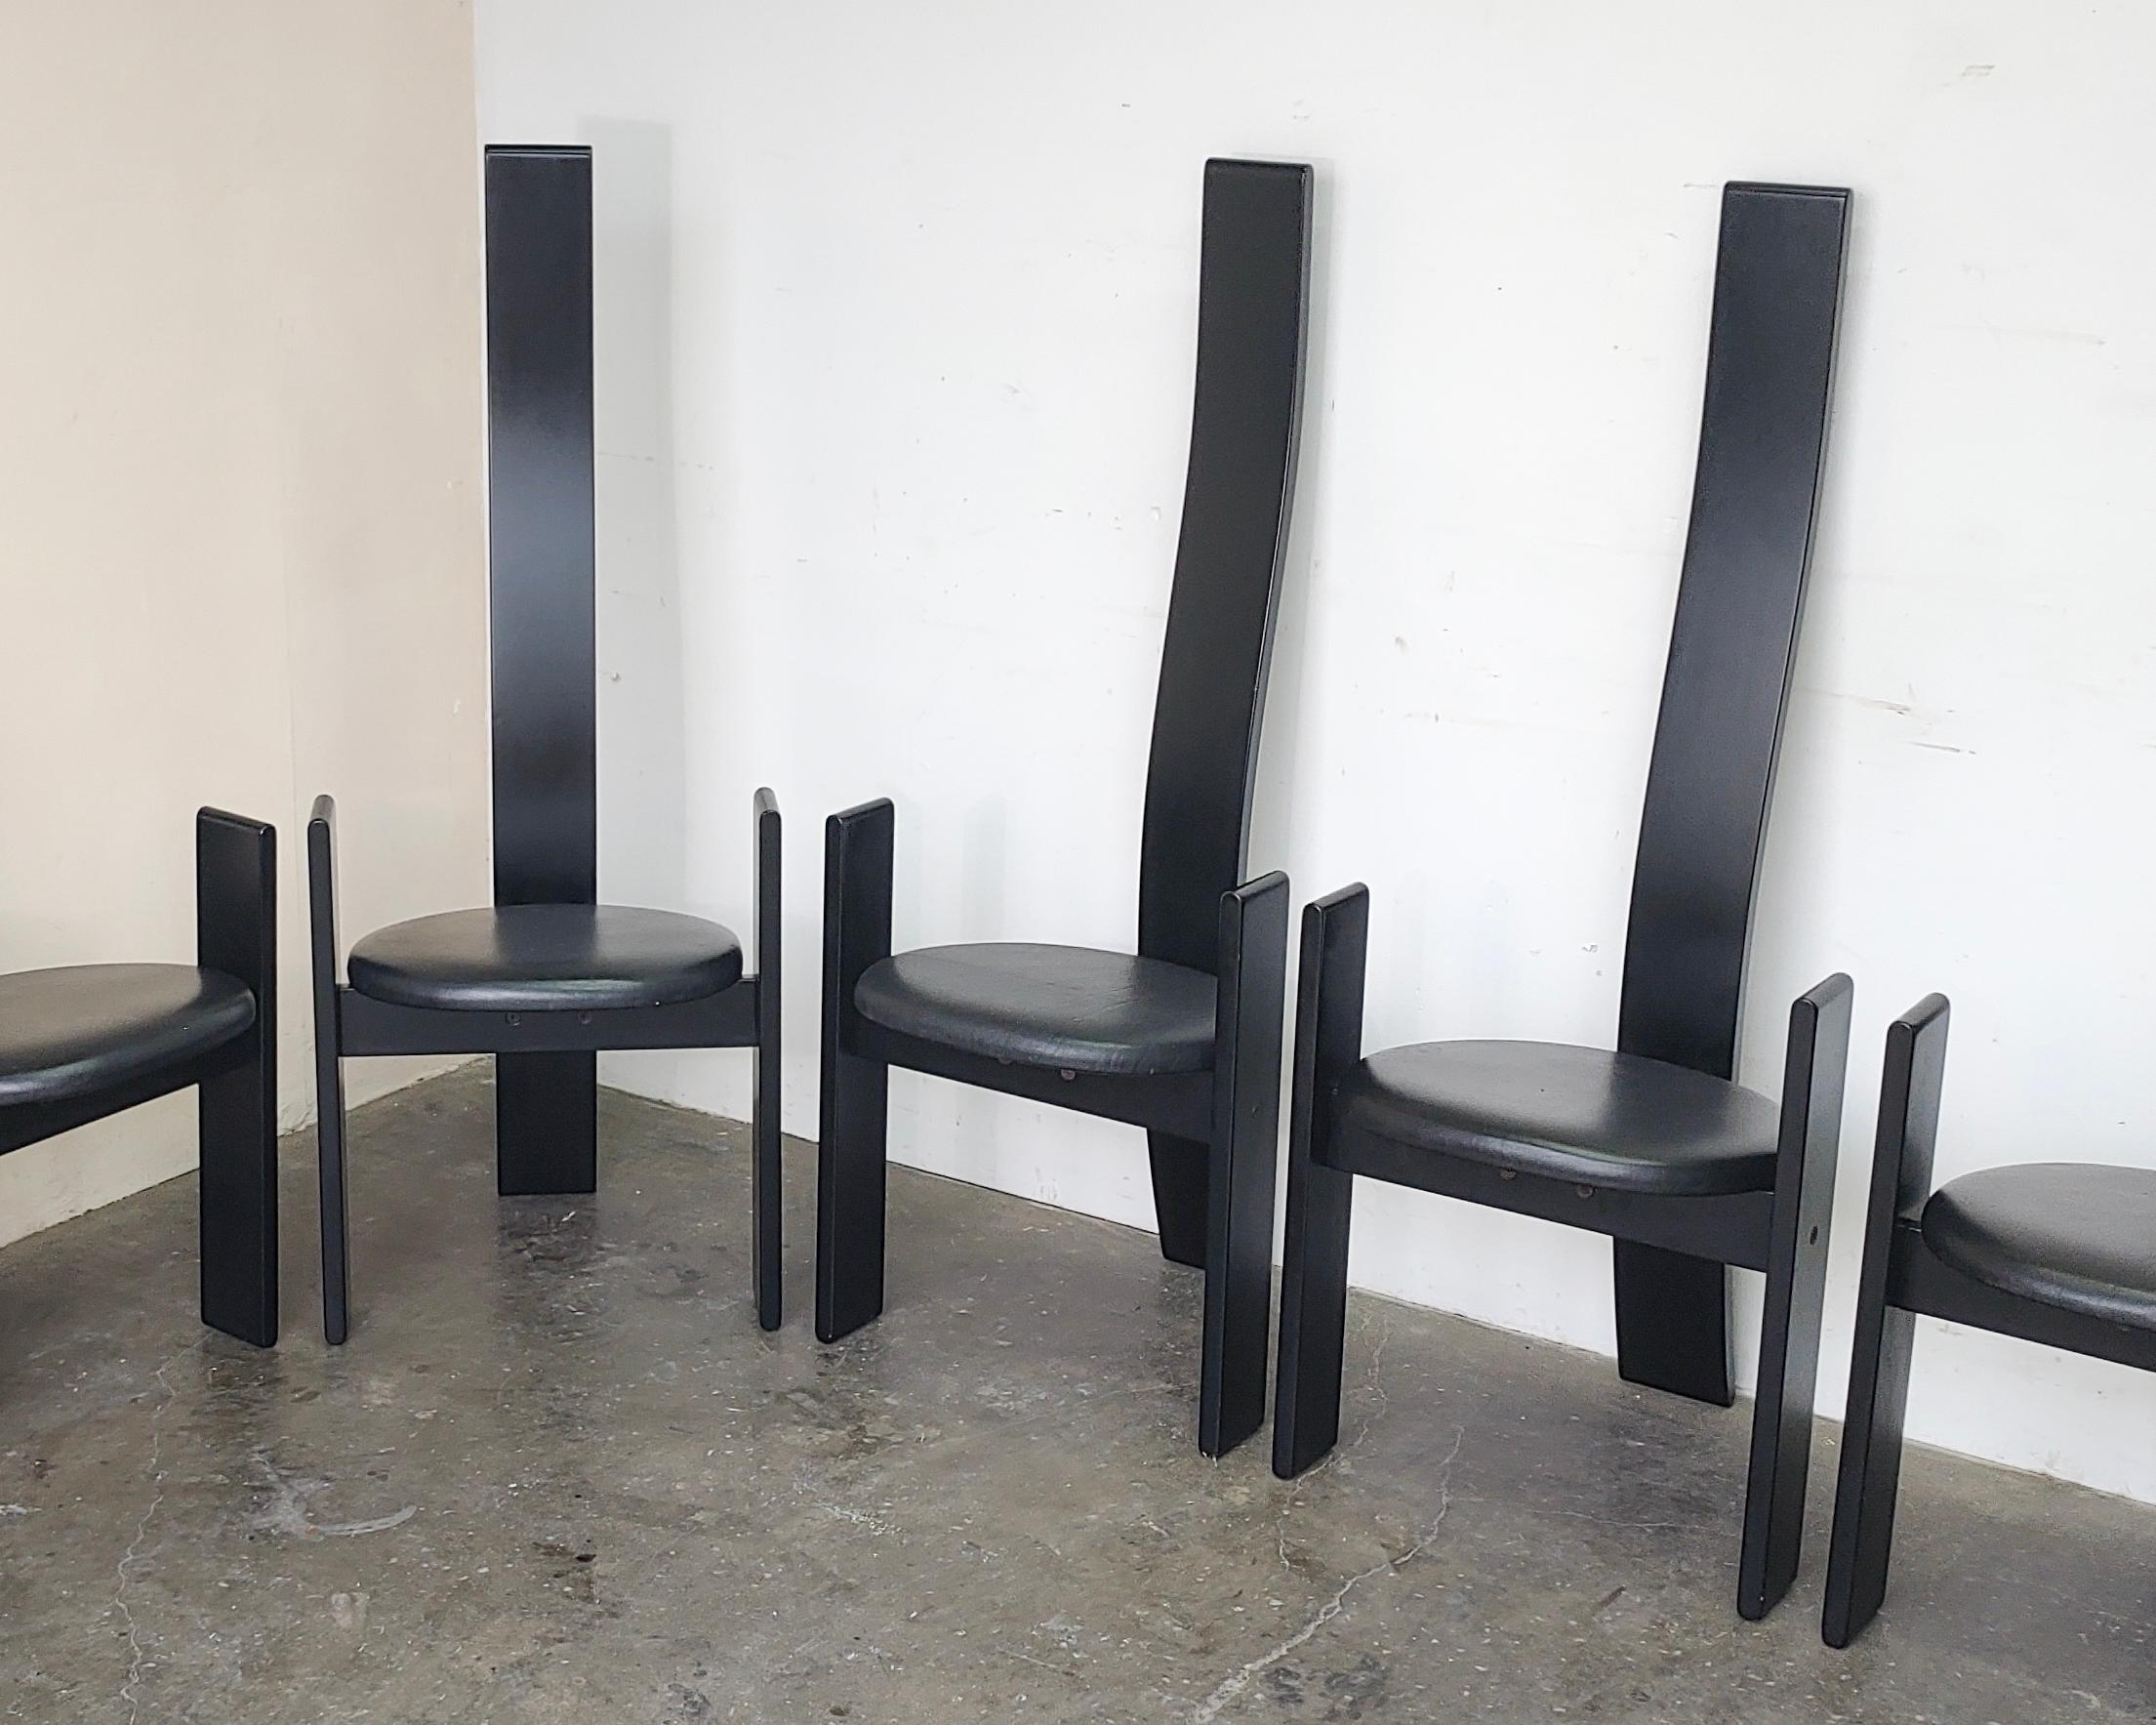 Set of 6 iconic 'Golem' dining chairs designed by Vico Magistretti for Poggi 1969, made in Italy. Black lacquer finish with original vinyl upholstery. Shows some wear and light damage to the finish in some areas, see photos. 

Measures: 19.75